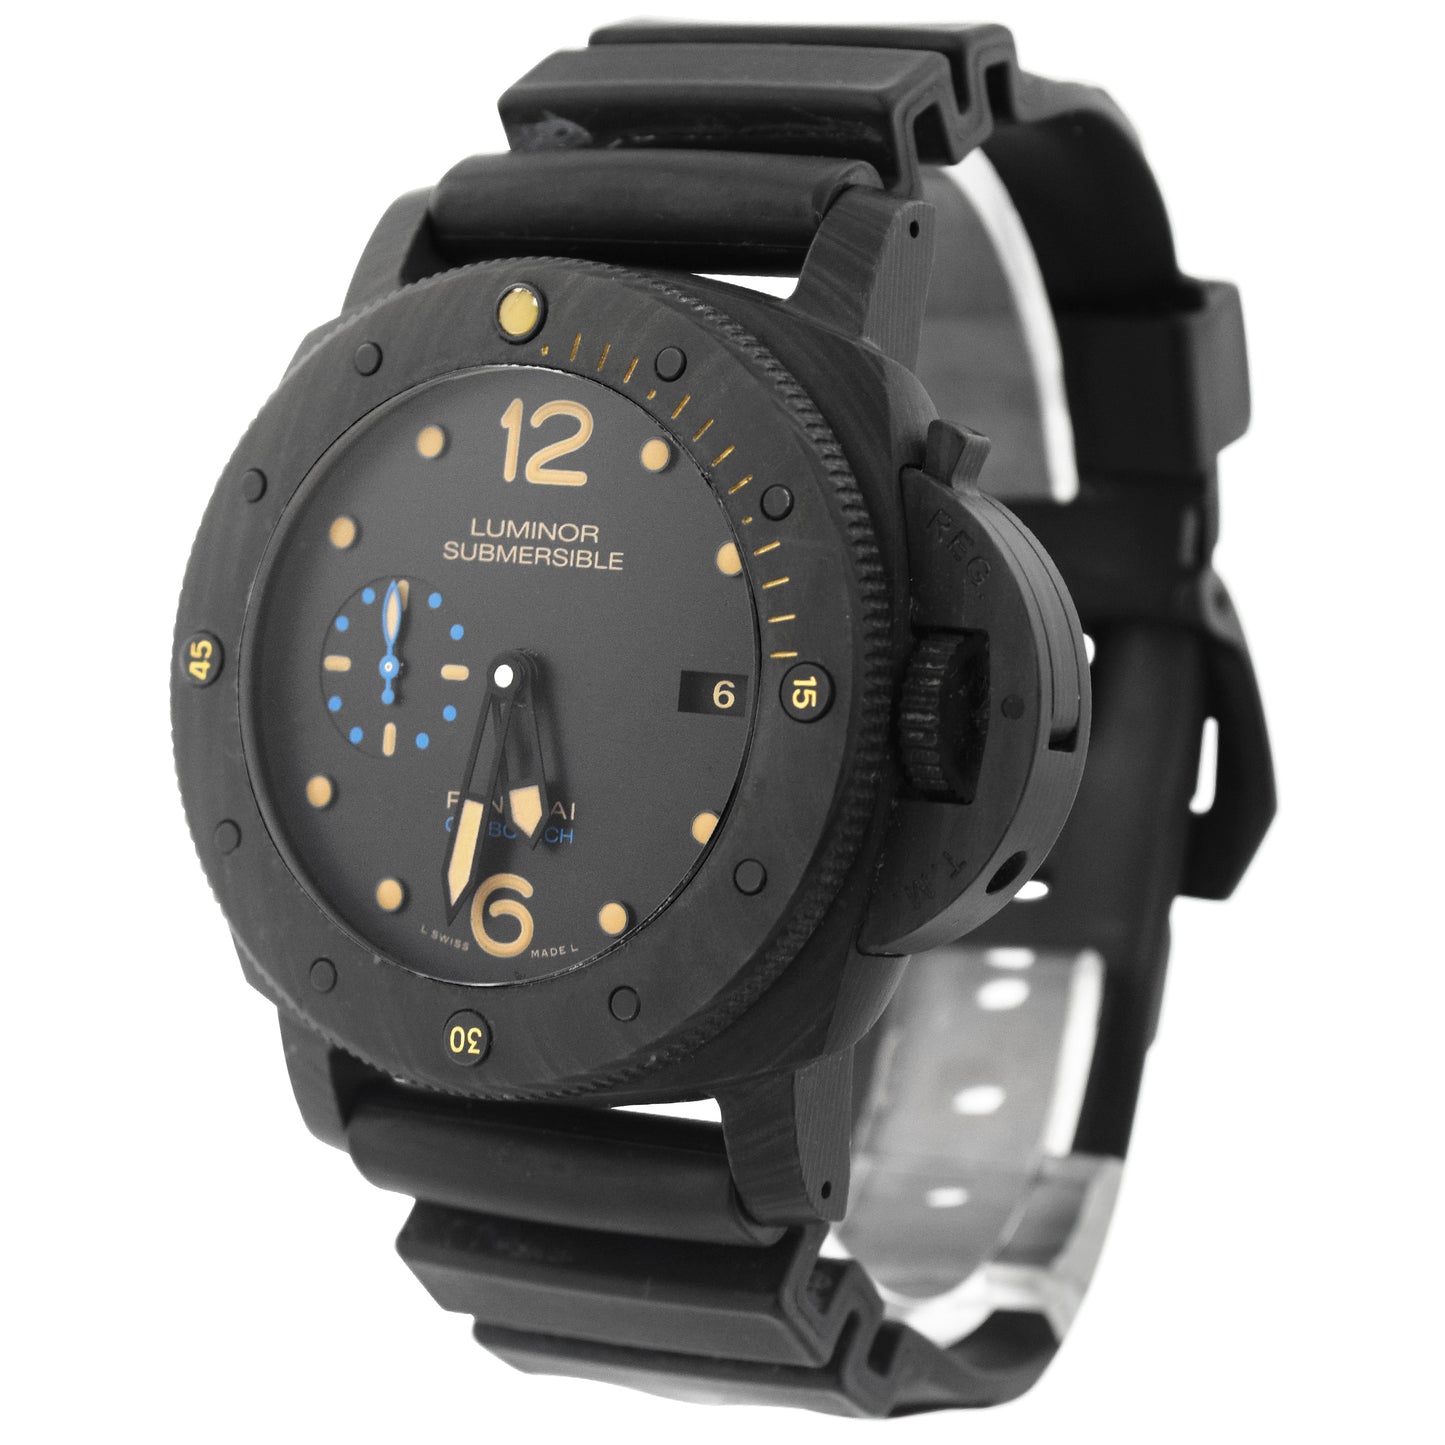 Panerai Men's Luminor Submersible Carbotech 47mm Black Dial Watch Reference #: PAM00616 - Happy Jewelers Fine Jewelry Lifetime Warranty